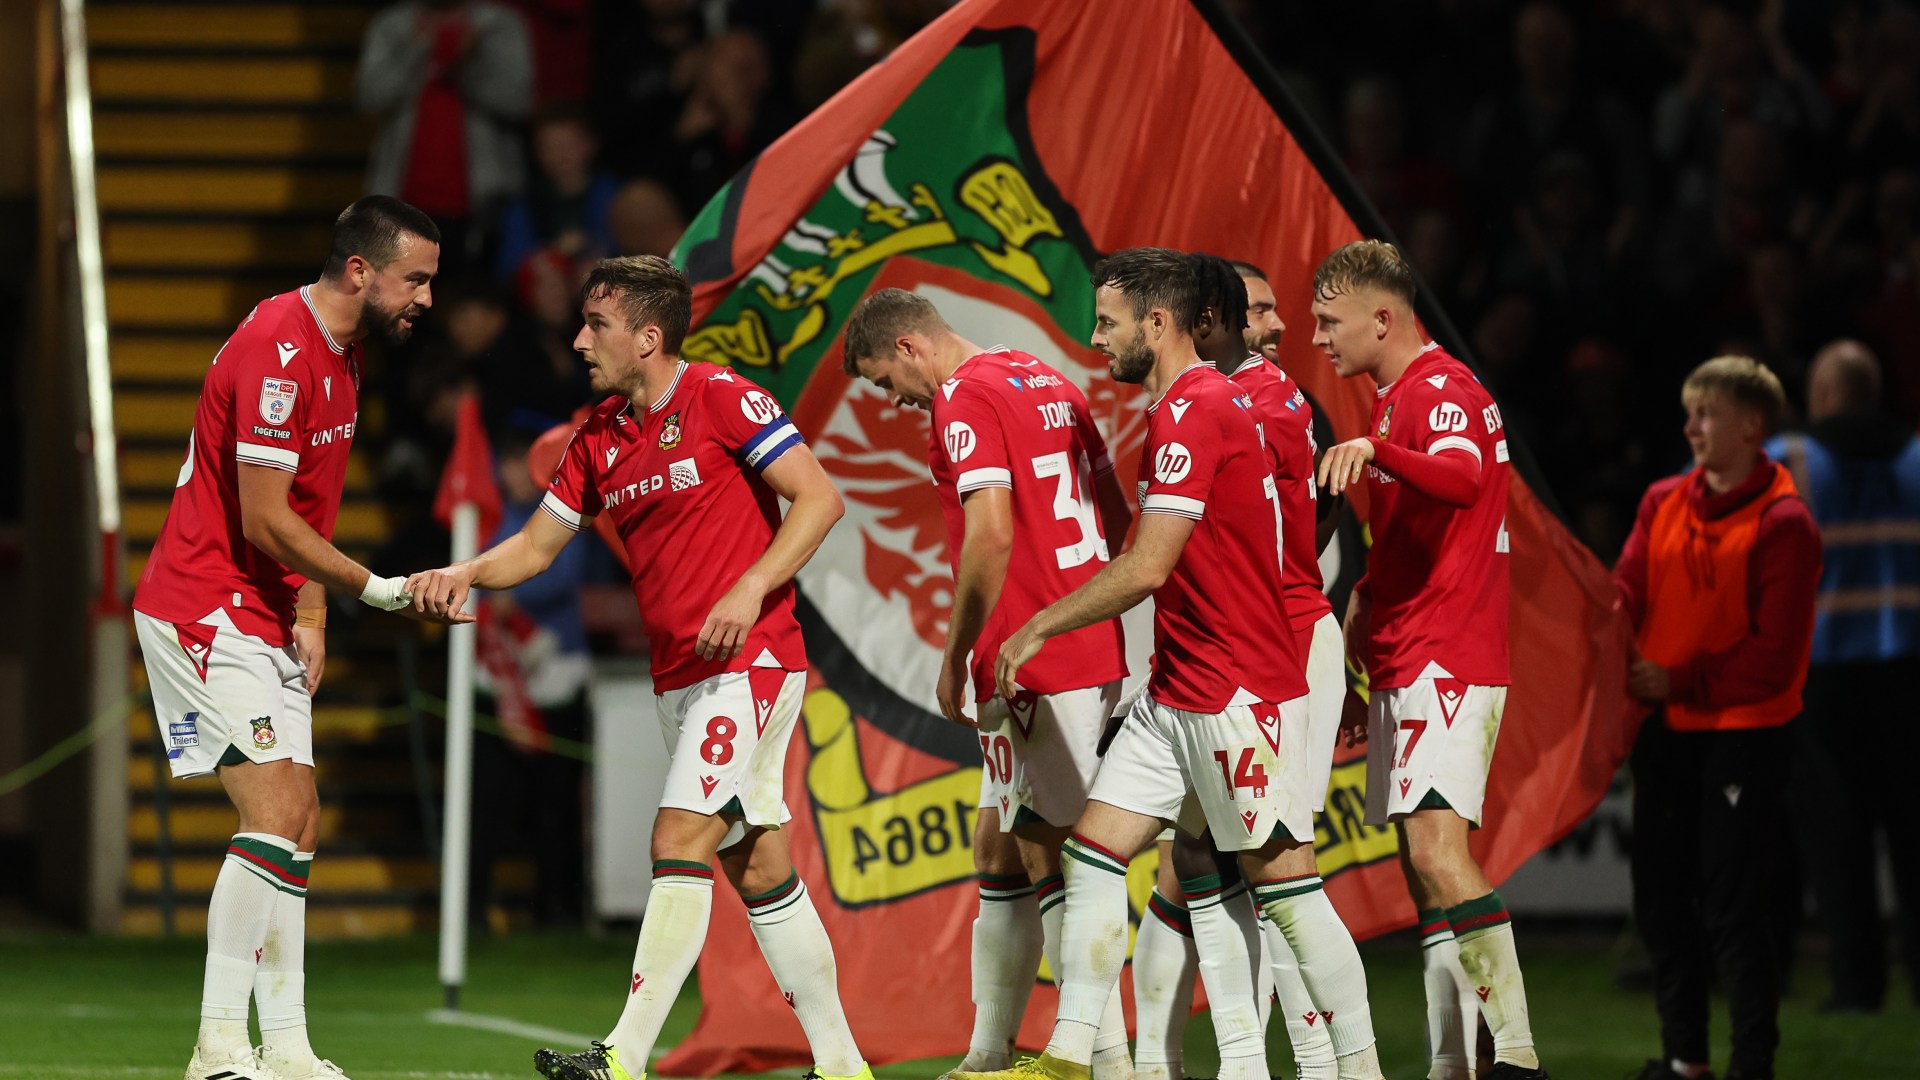 Rob McElhenney shares delight as Wrexham win first EFL match in 15 years